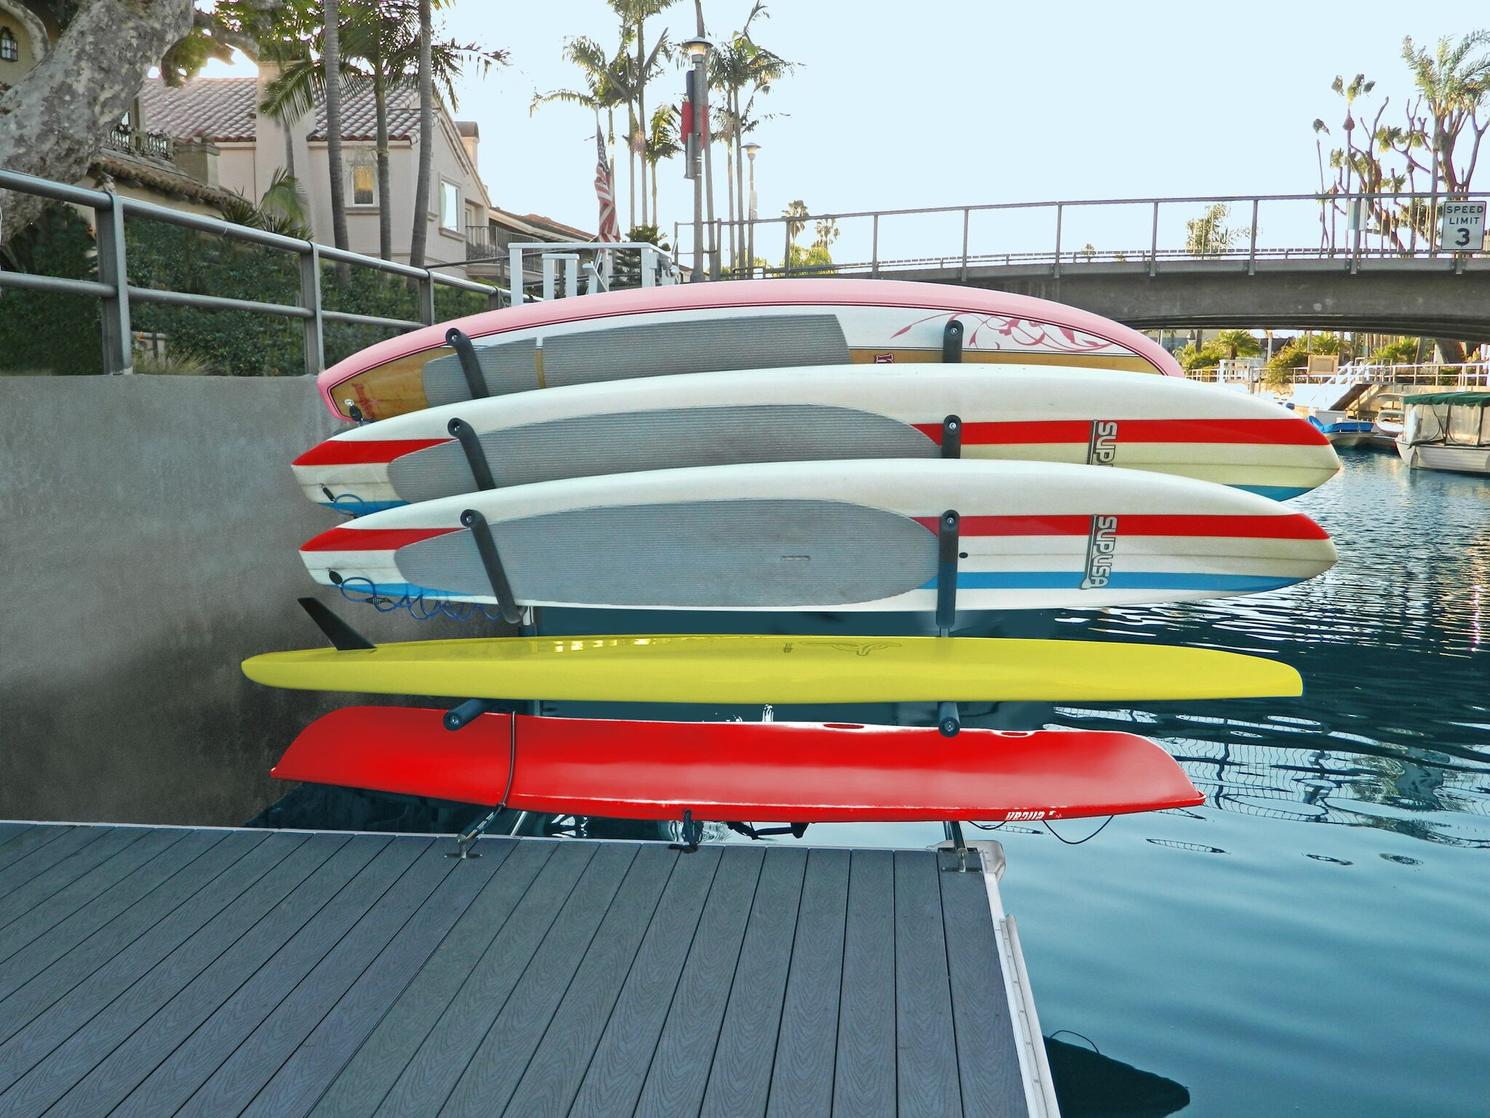 2023 Magma SUP Rack - Over the Water with 2 Angled Arm Sets